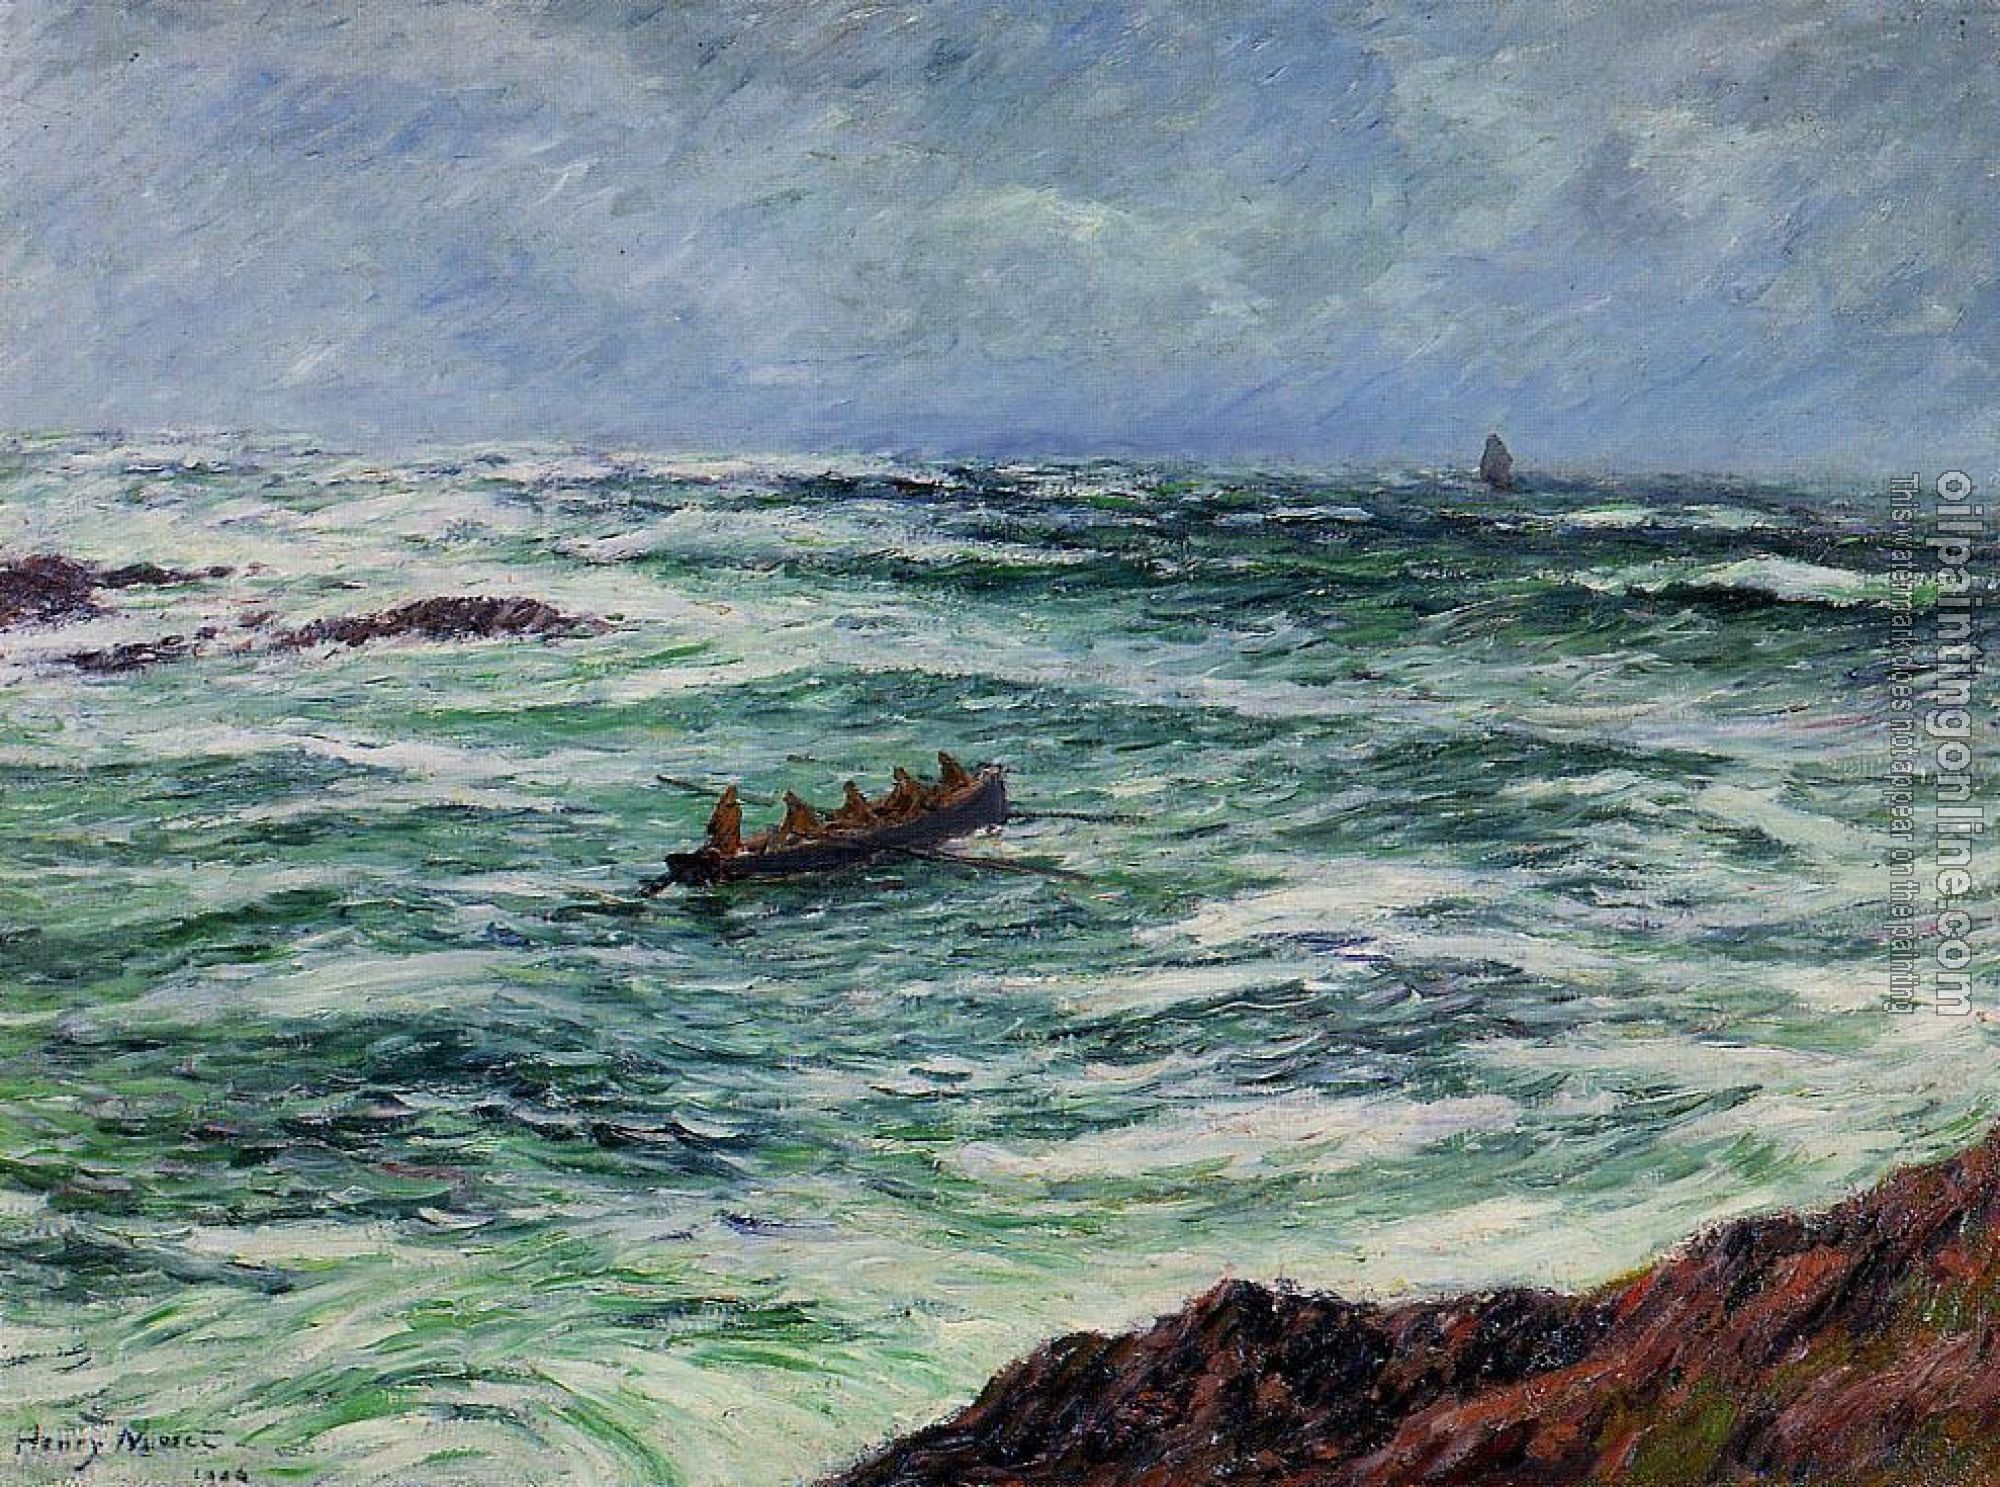 Moret, Henri - The Pilot, The Coast of Brittany